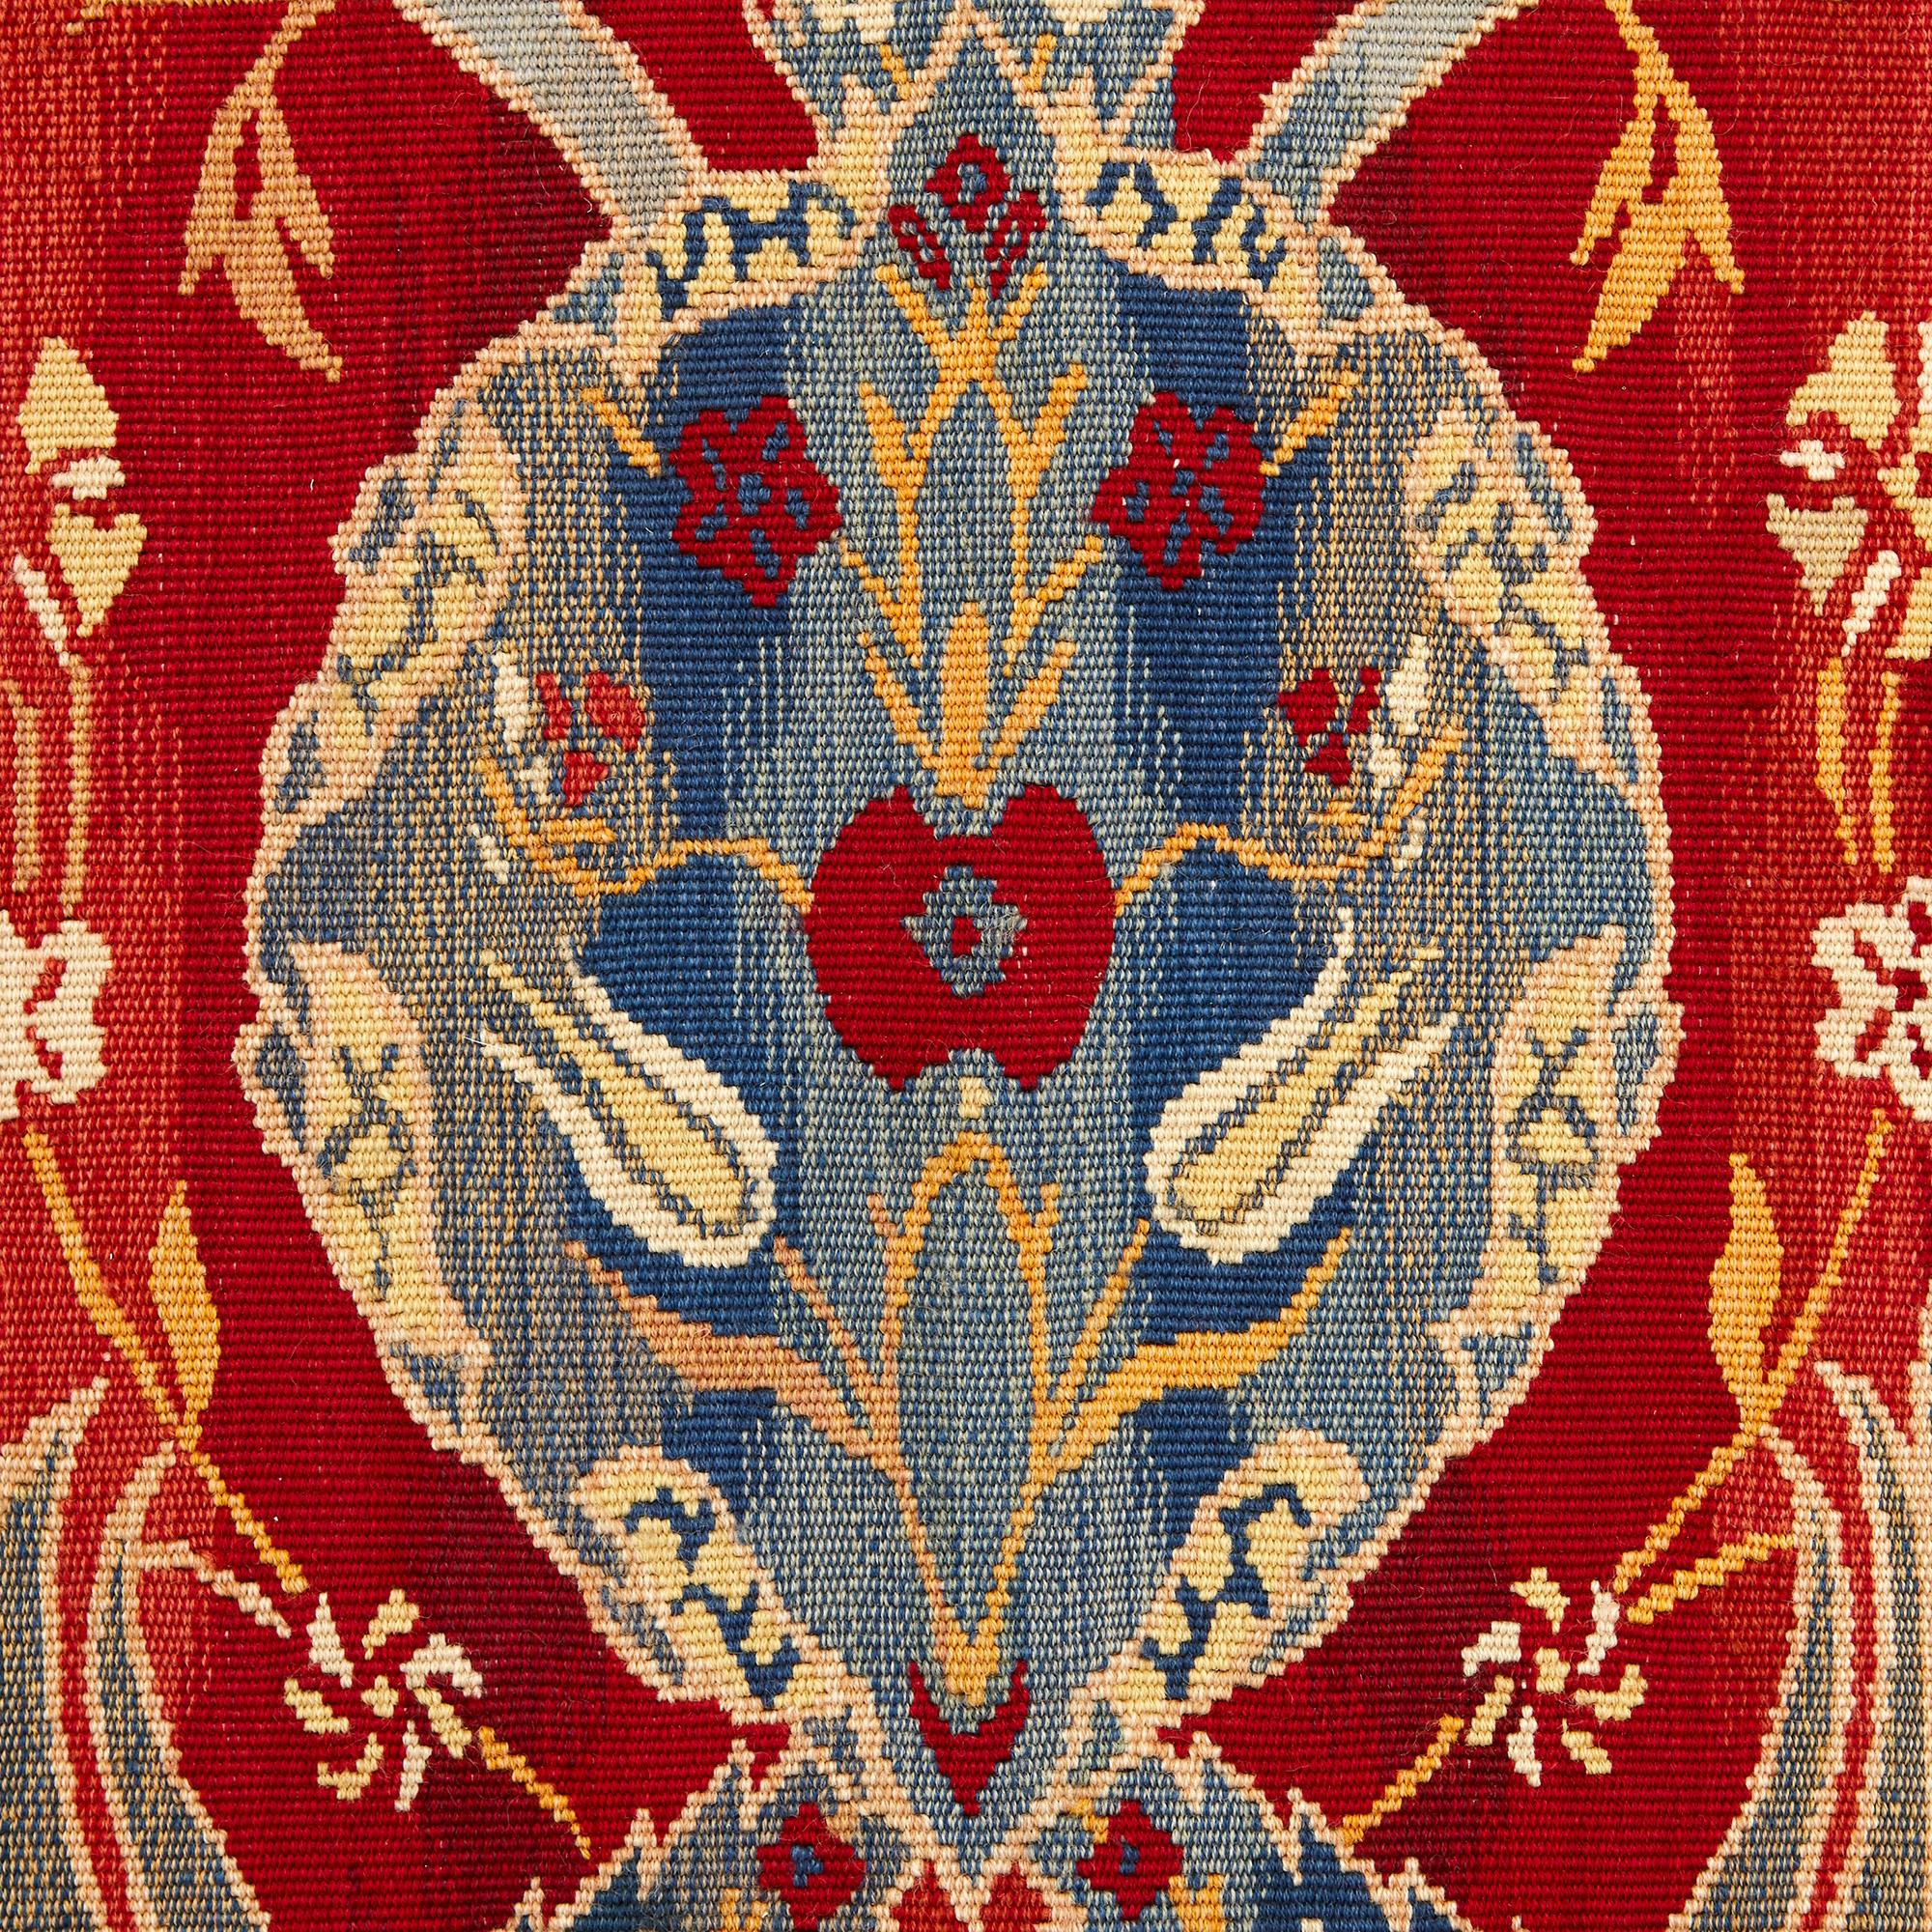 This exquisite textile was created in England in the early 20th century, when the Arts & Crafts style was in fashion in the decorative arts. The movement championed traditional methods of working by hand to create beautiful objects which were then